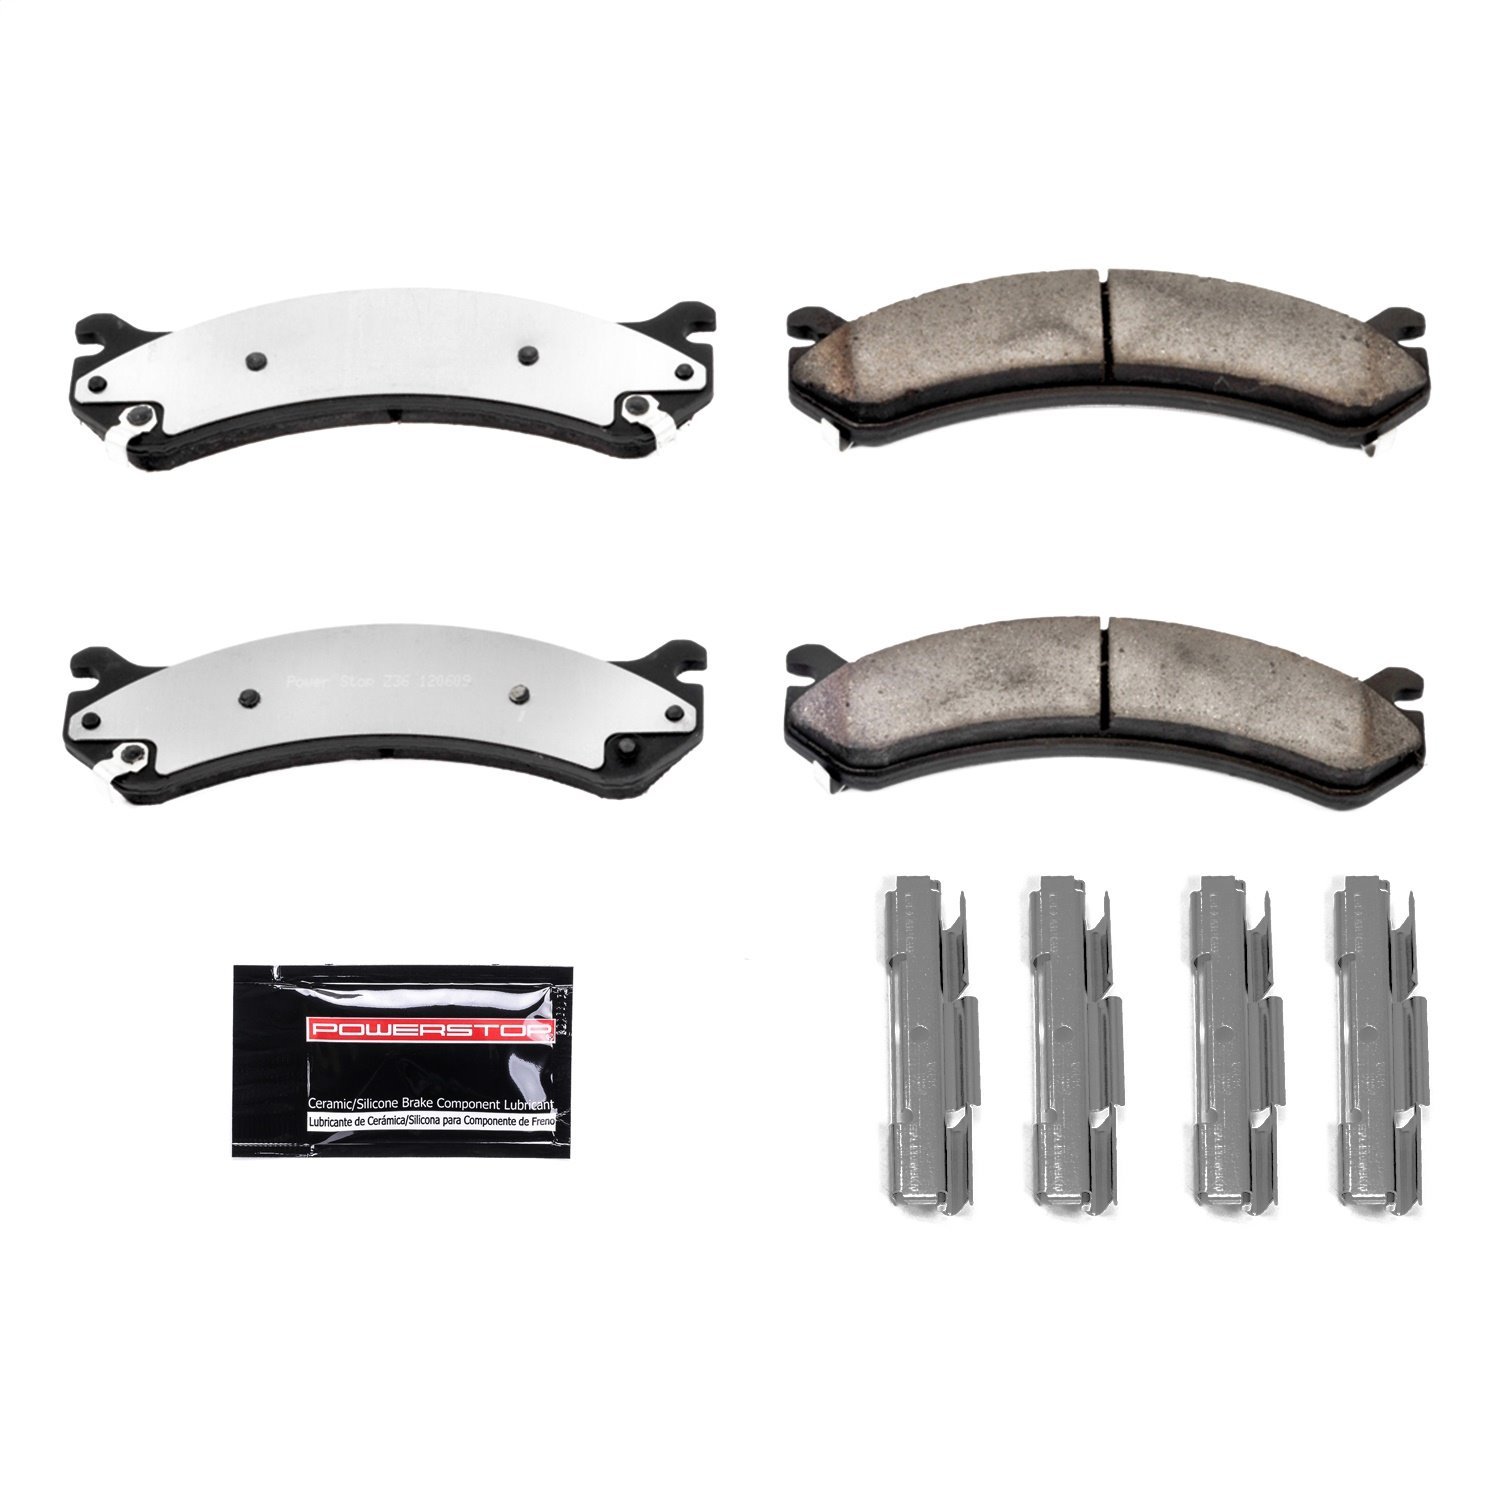 Z36 Truck And Tow Carbon Ceramic Brake Pads